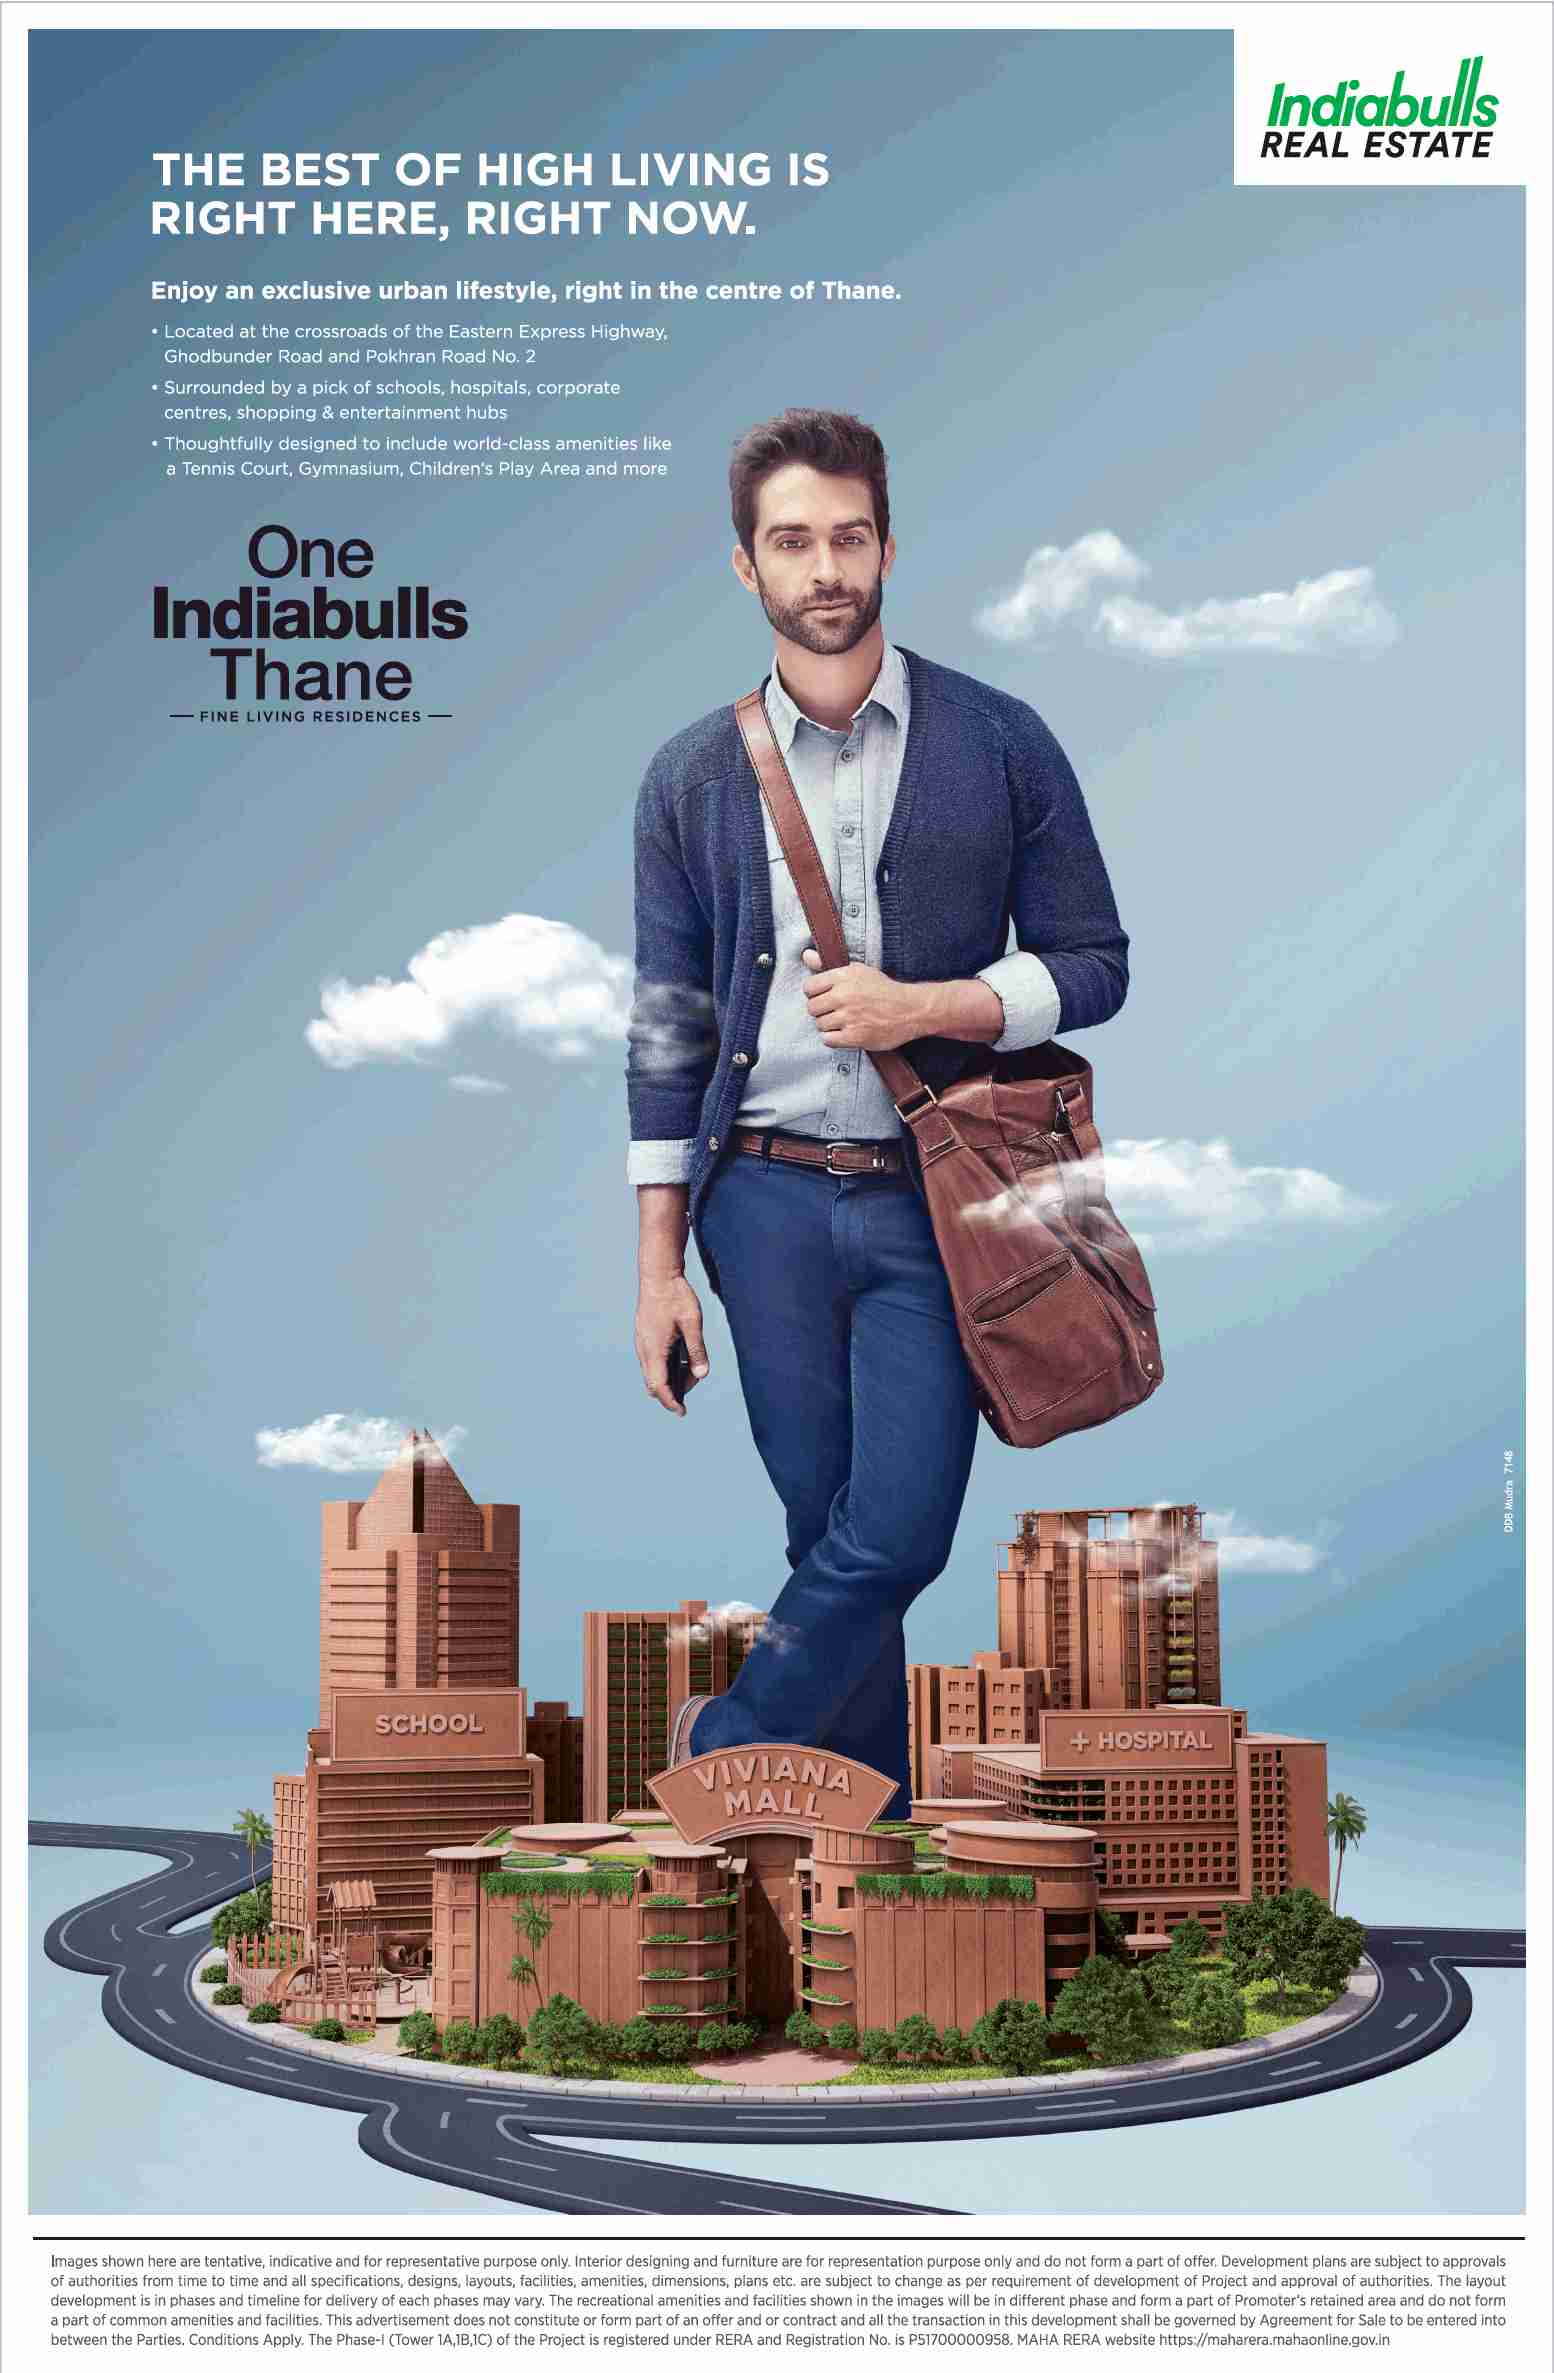 Enjoy an exclusive urban lifestyle right in the centre of Thane at One Indiabulls Thane in Mumbai Update